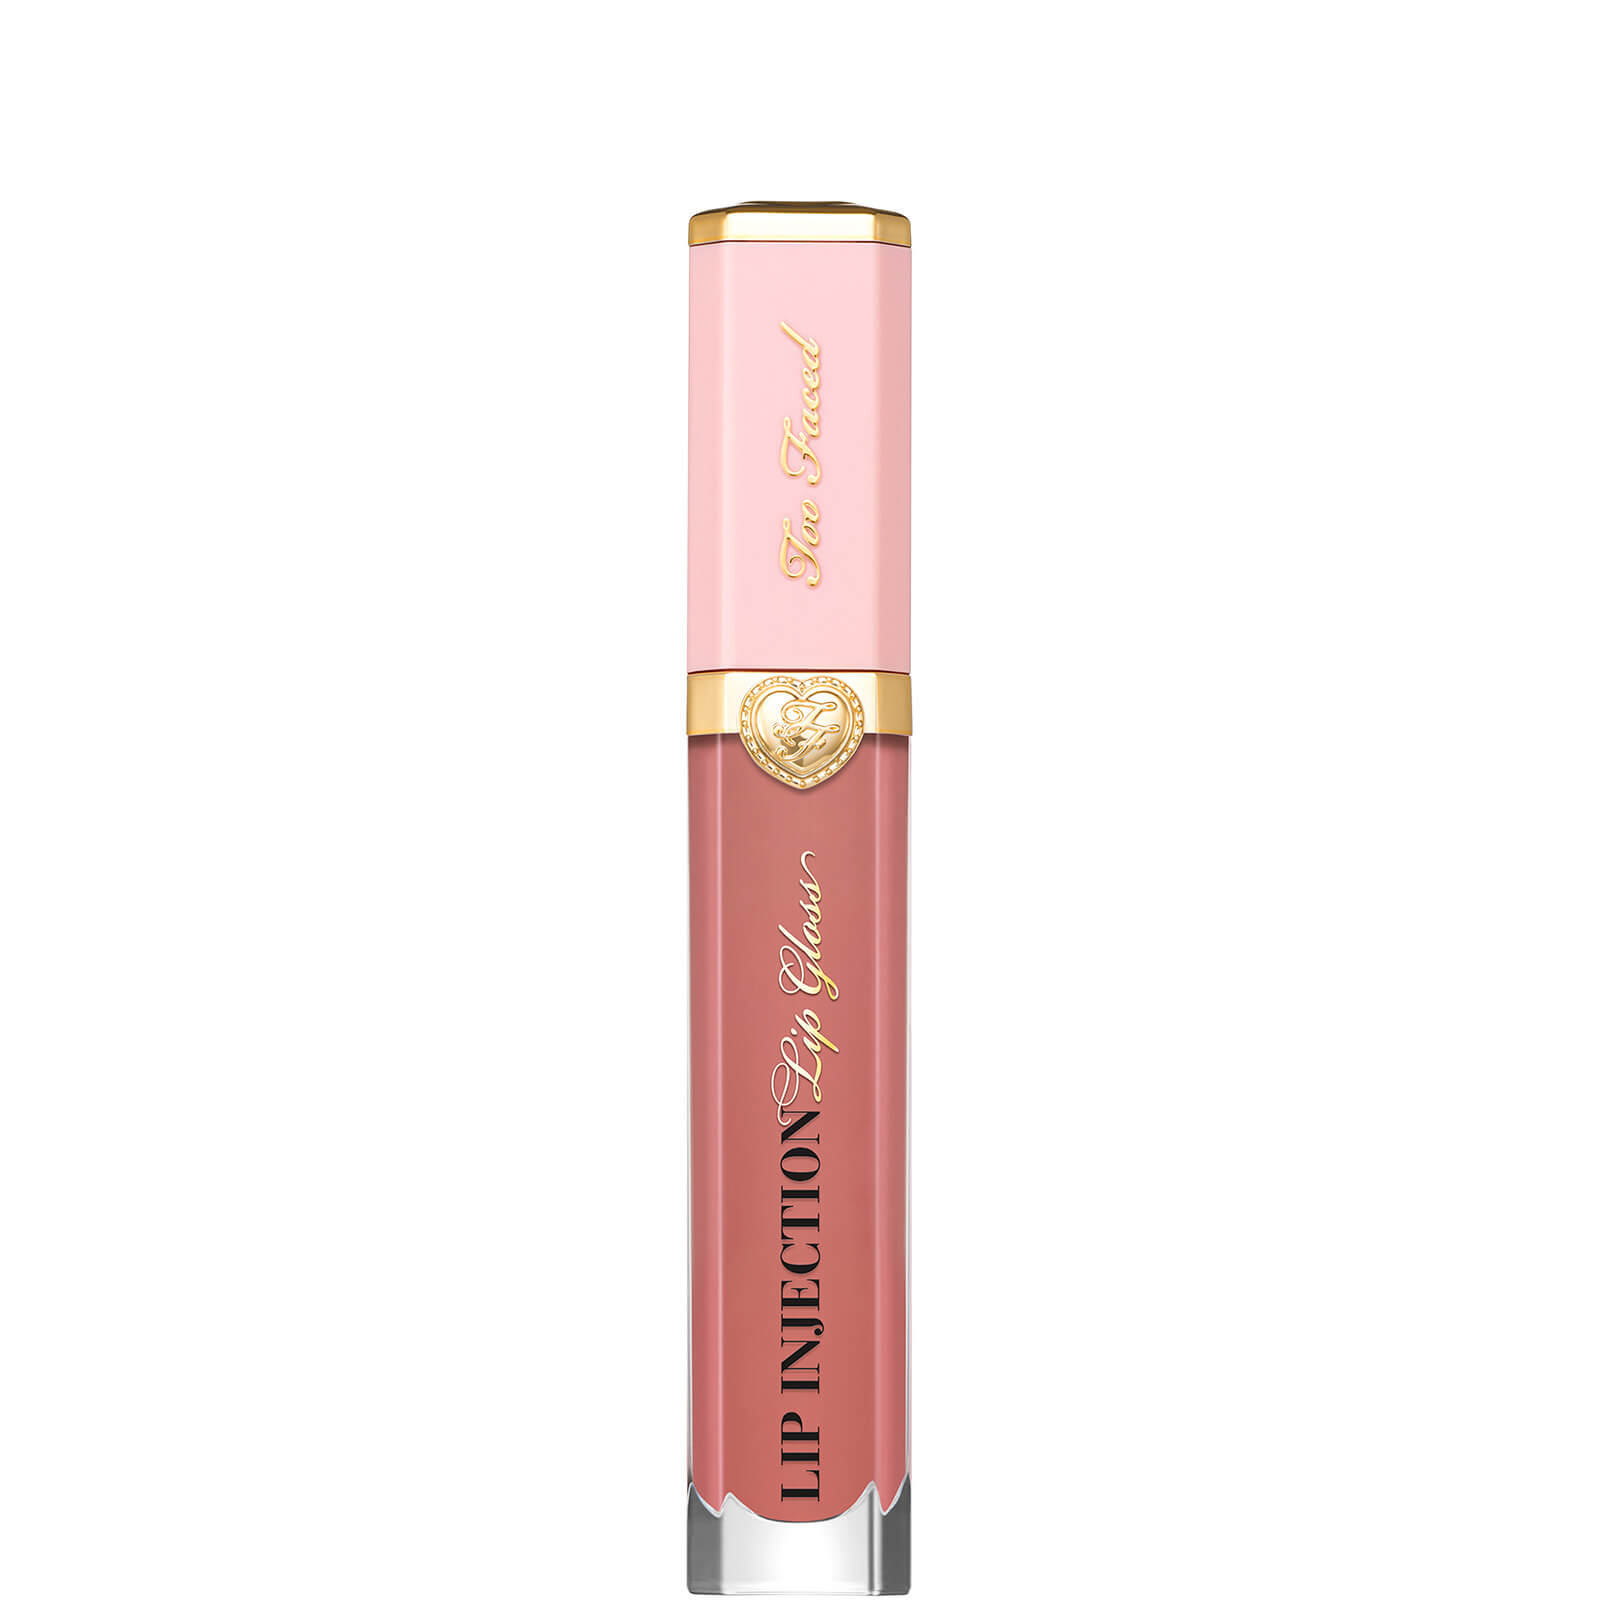 Too Faced Lip Injection Power Plumping Lip Gloss (Various Shades) - Wifey For Lifey